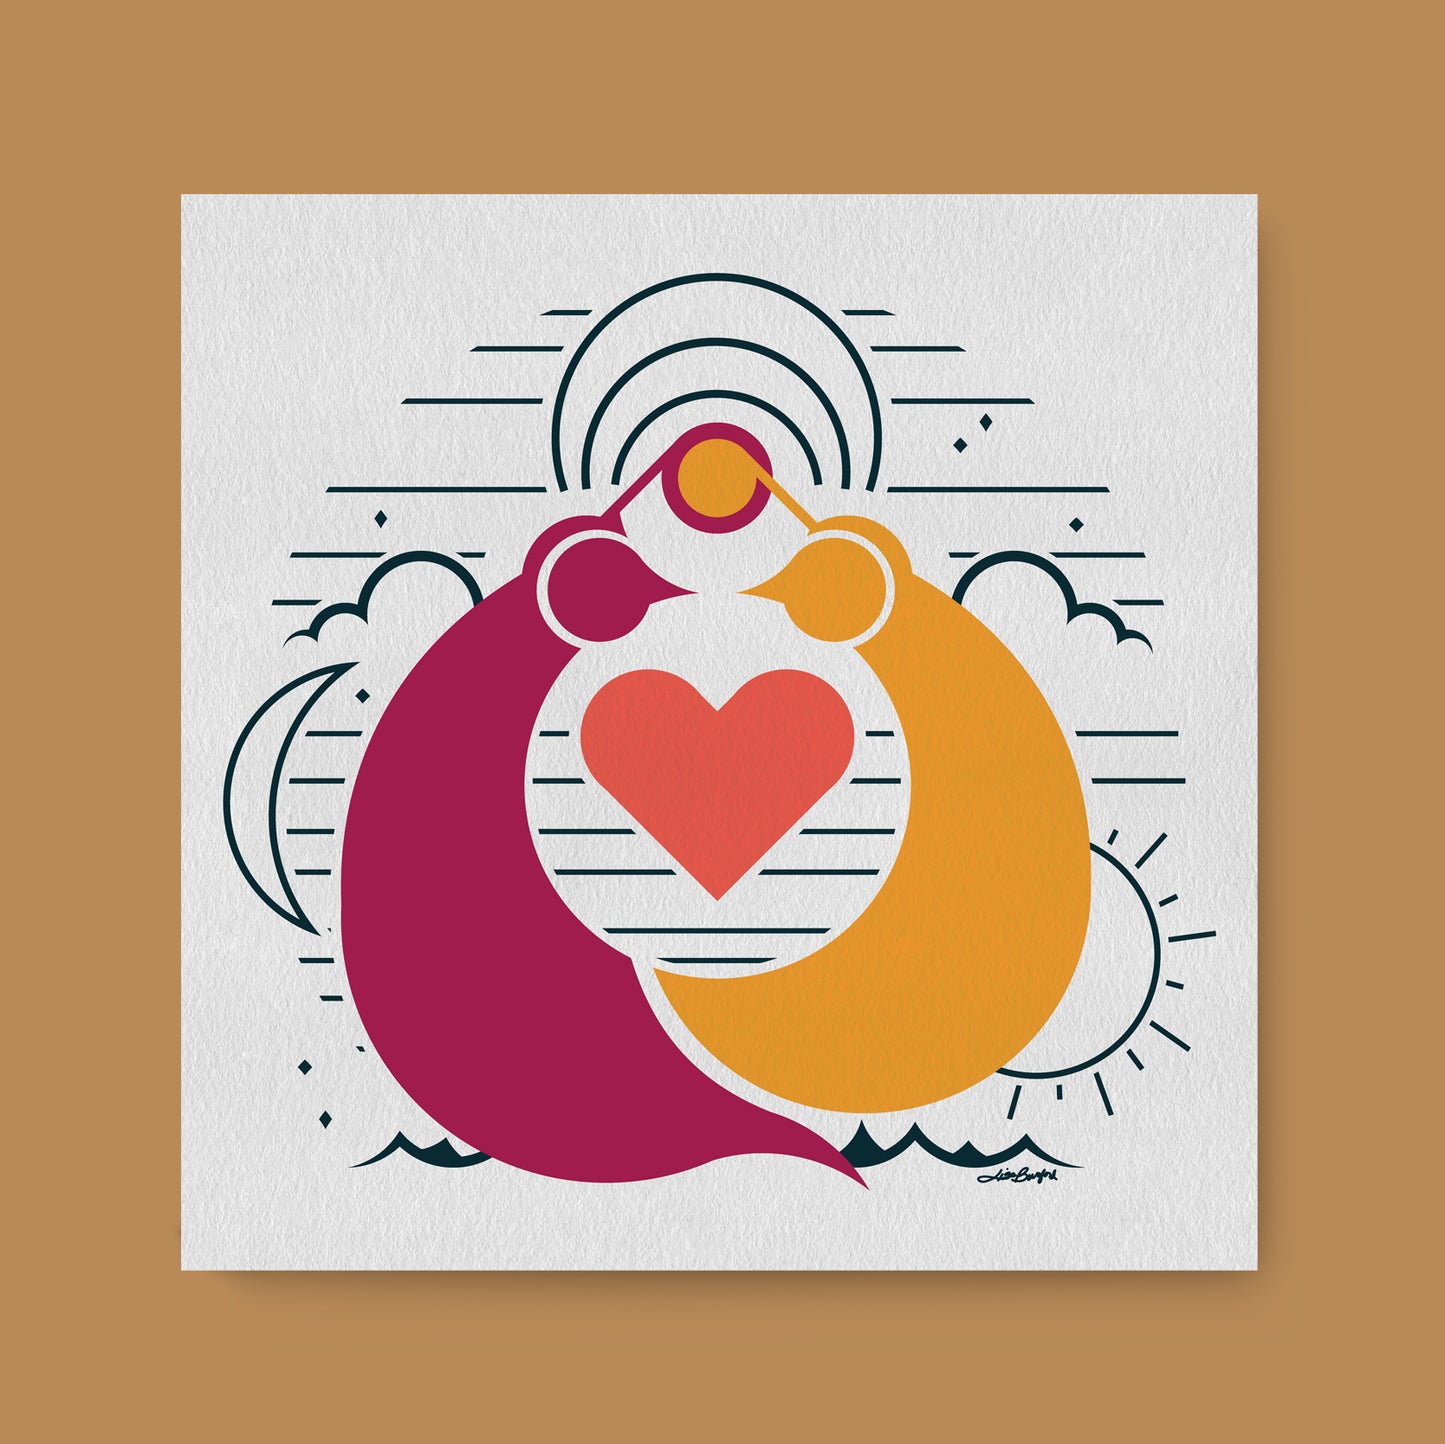 A 12"x12" print resting on a separate tan colored background. The illustrated print depicts two quails facing each other with their top knots overlapping. A heart fits in between them. There is a crescent moon, a sun, clouds, stars, and mountains in the background of the illustration.